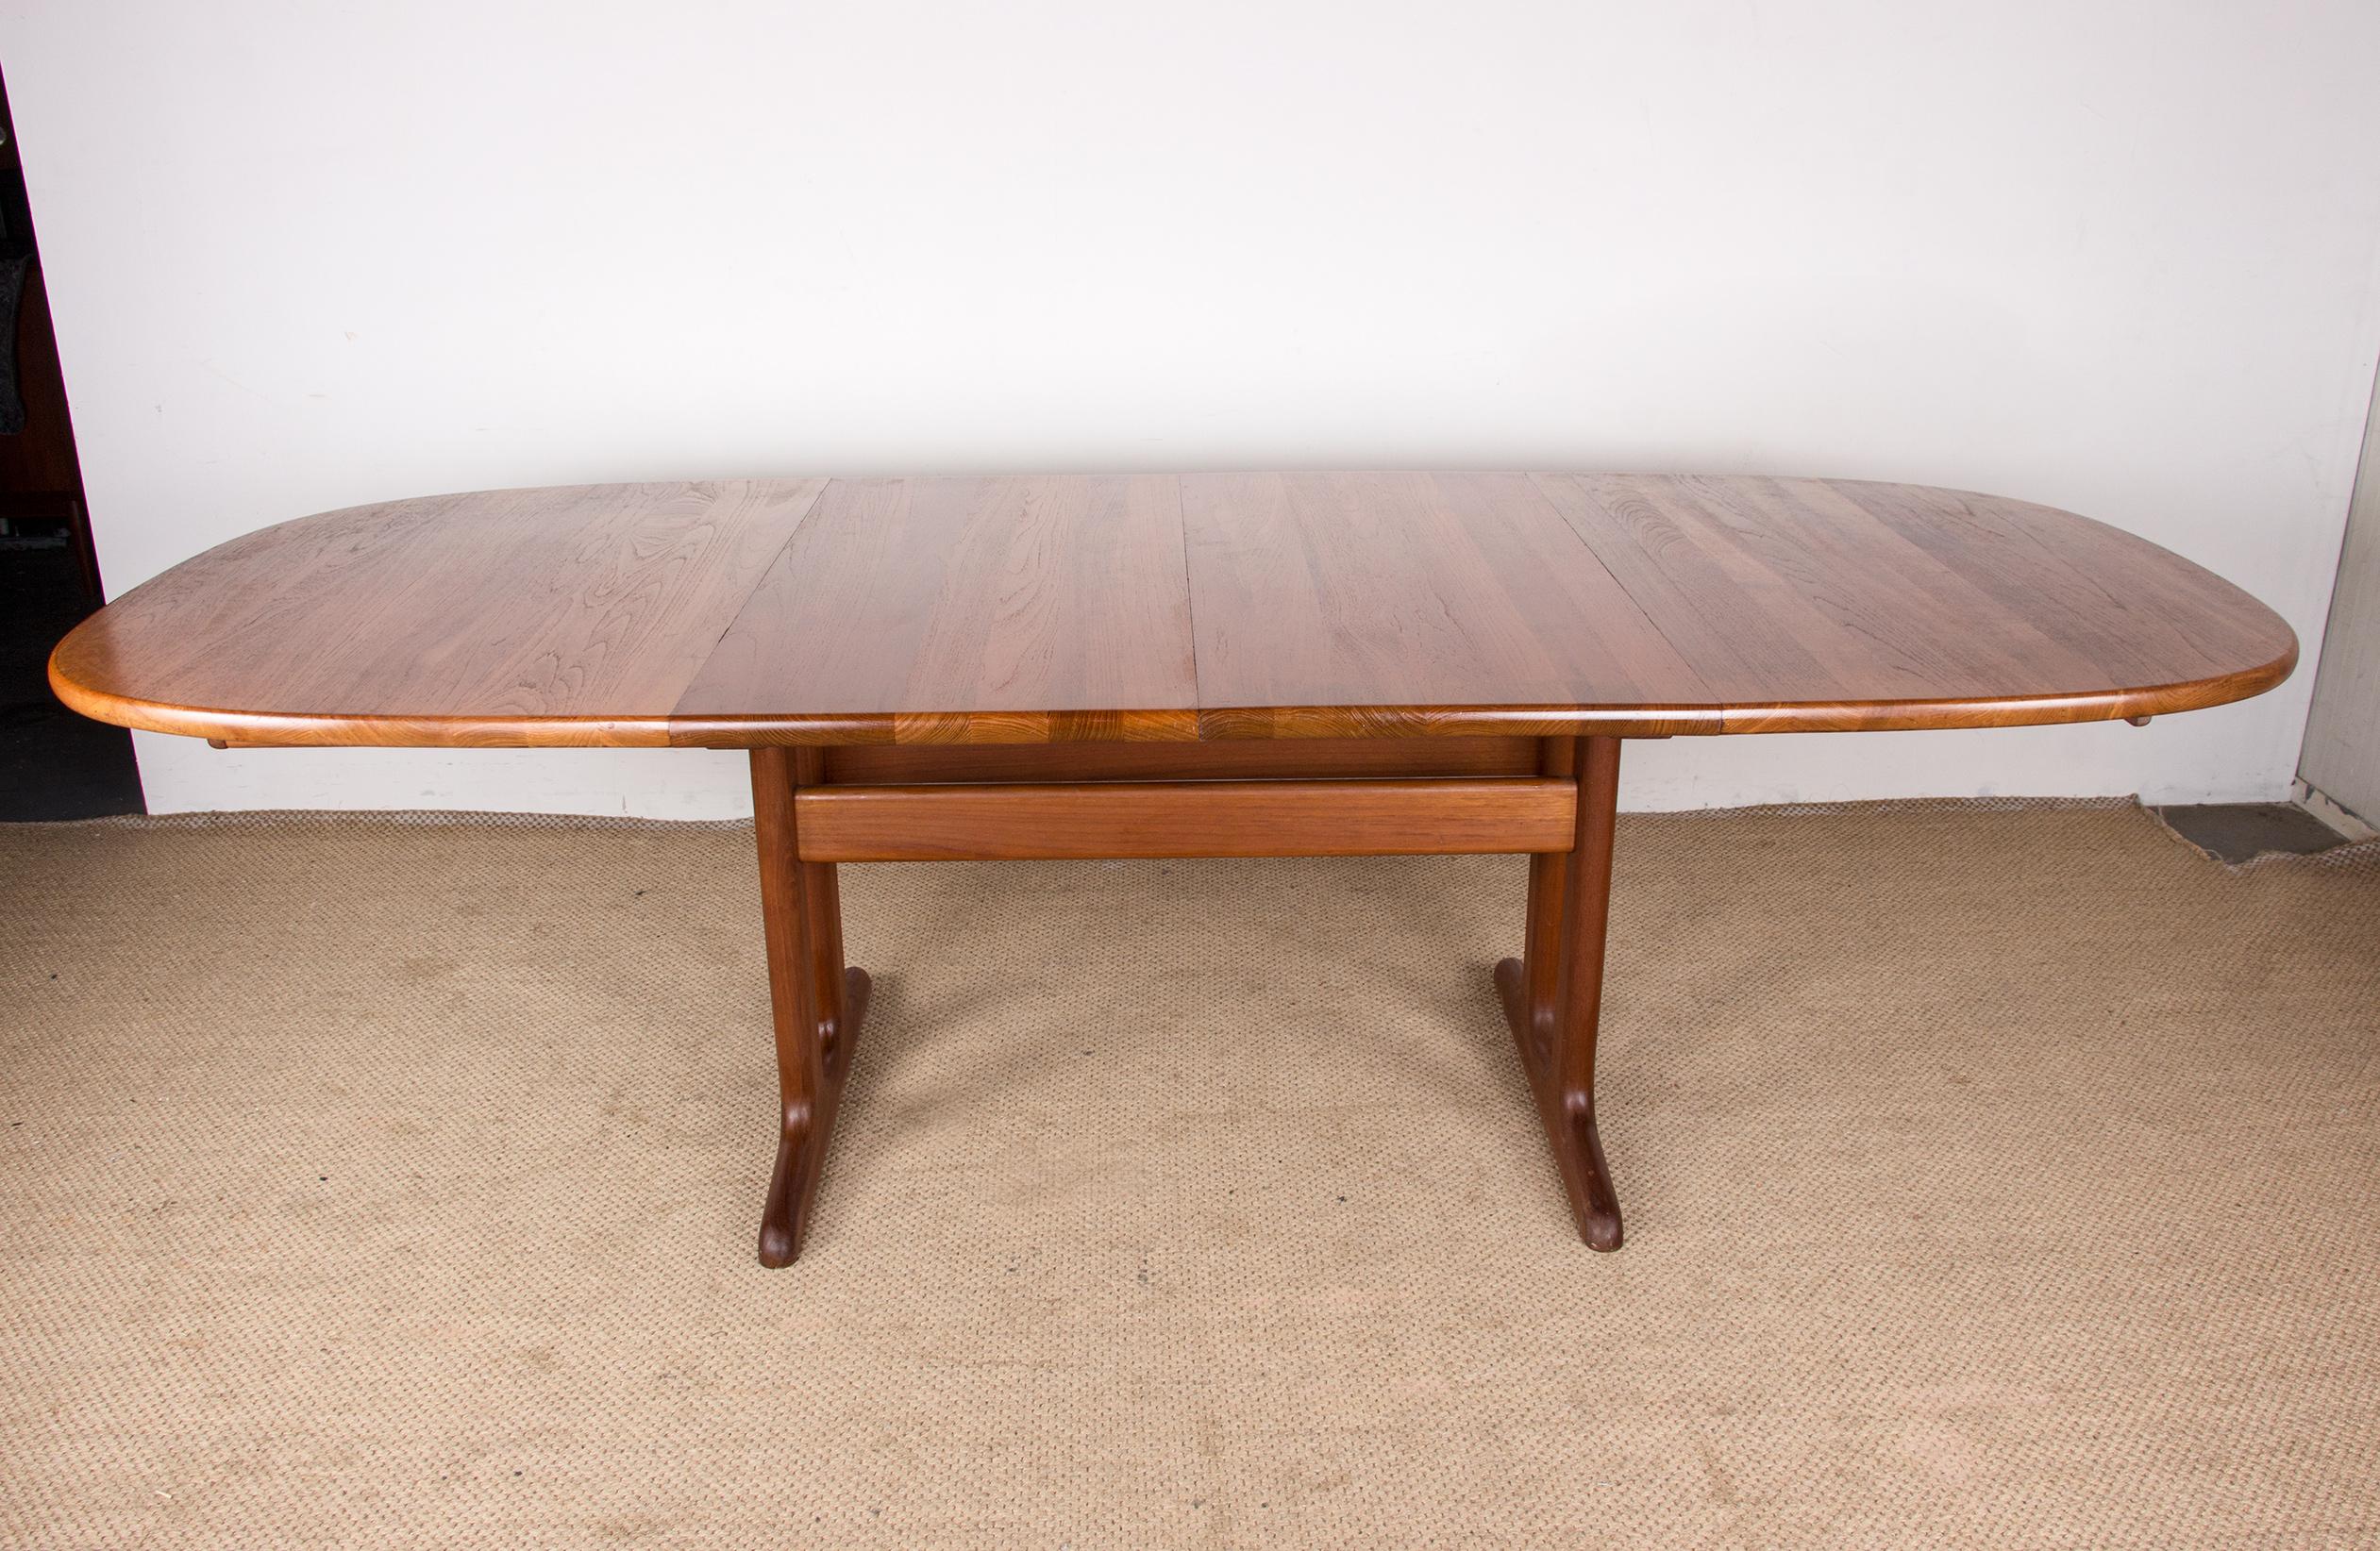 Very large Danish oval extendable dining table in solid Teak by Glostrup. 10